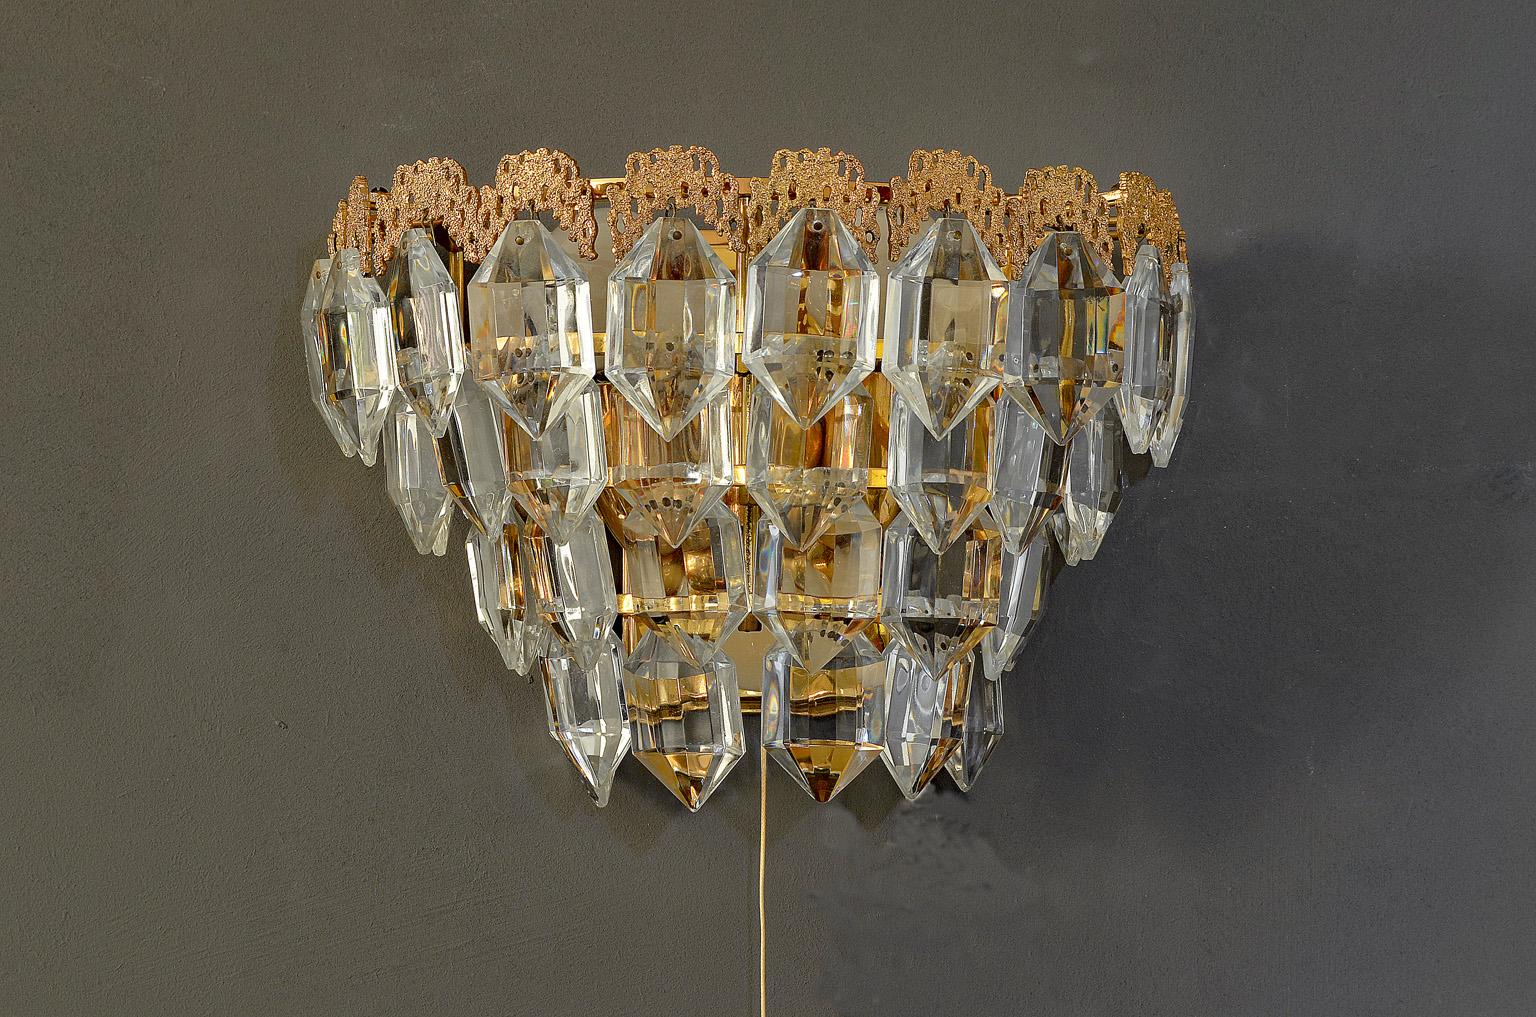 Mid-Century Modern Pair of Sconces from Bakalowits, Austria 1960s, Gilt Brass and Faceted Glass